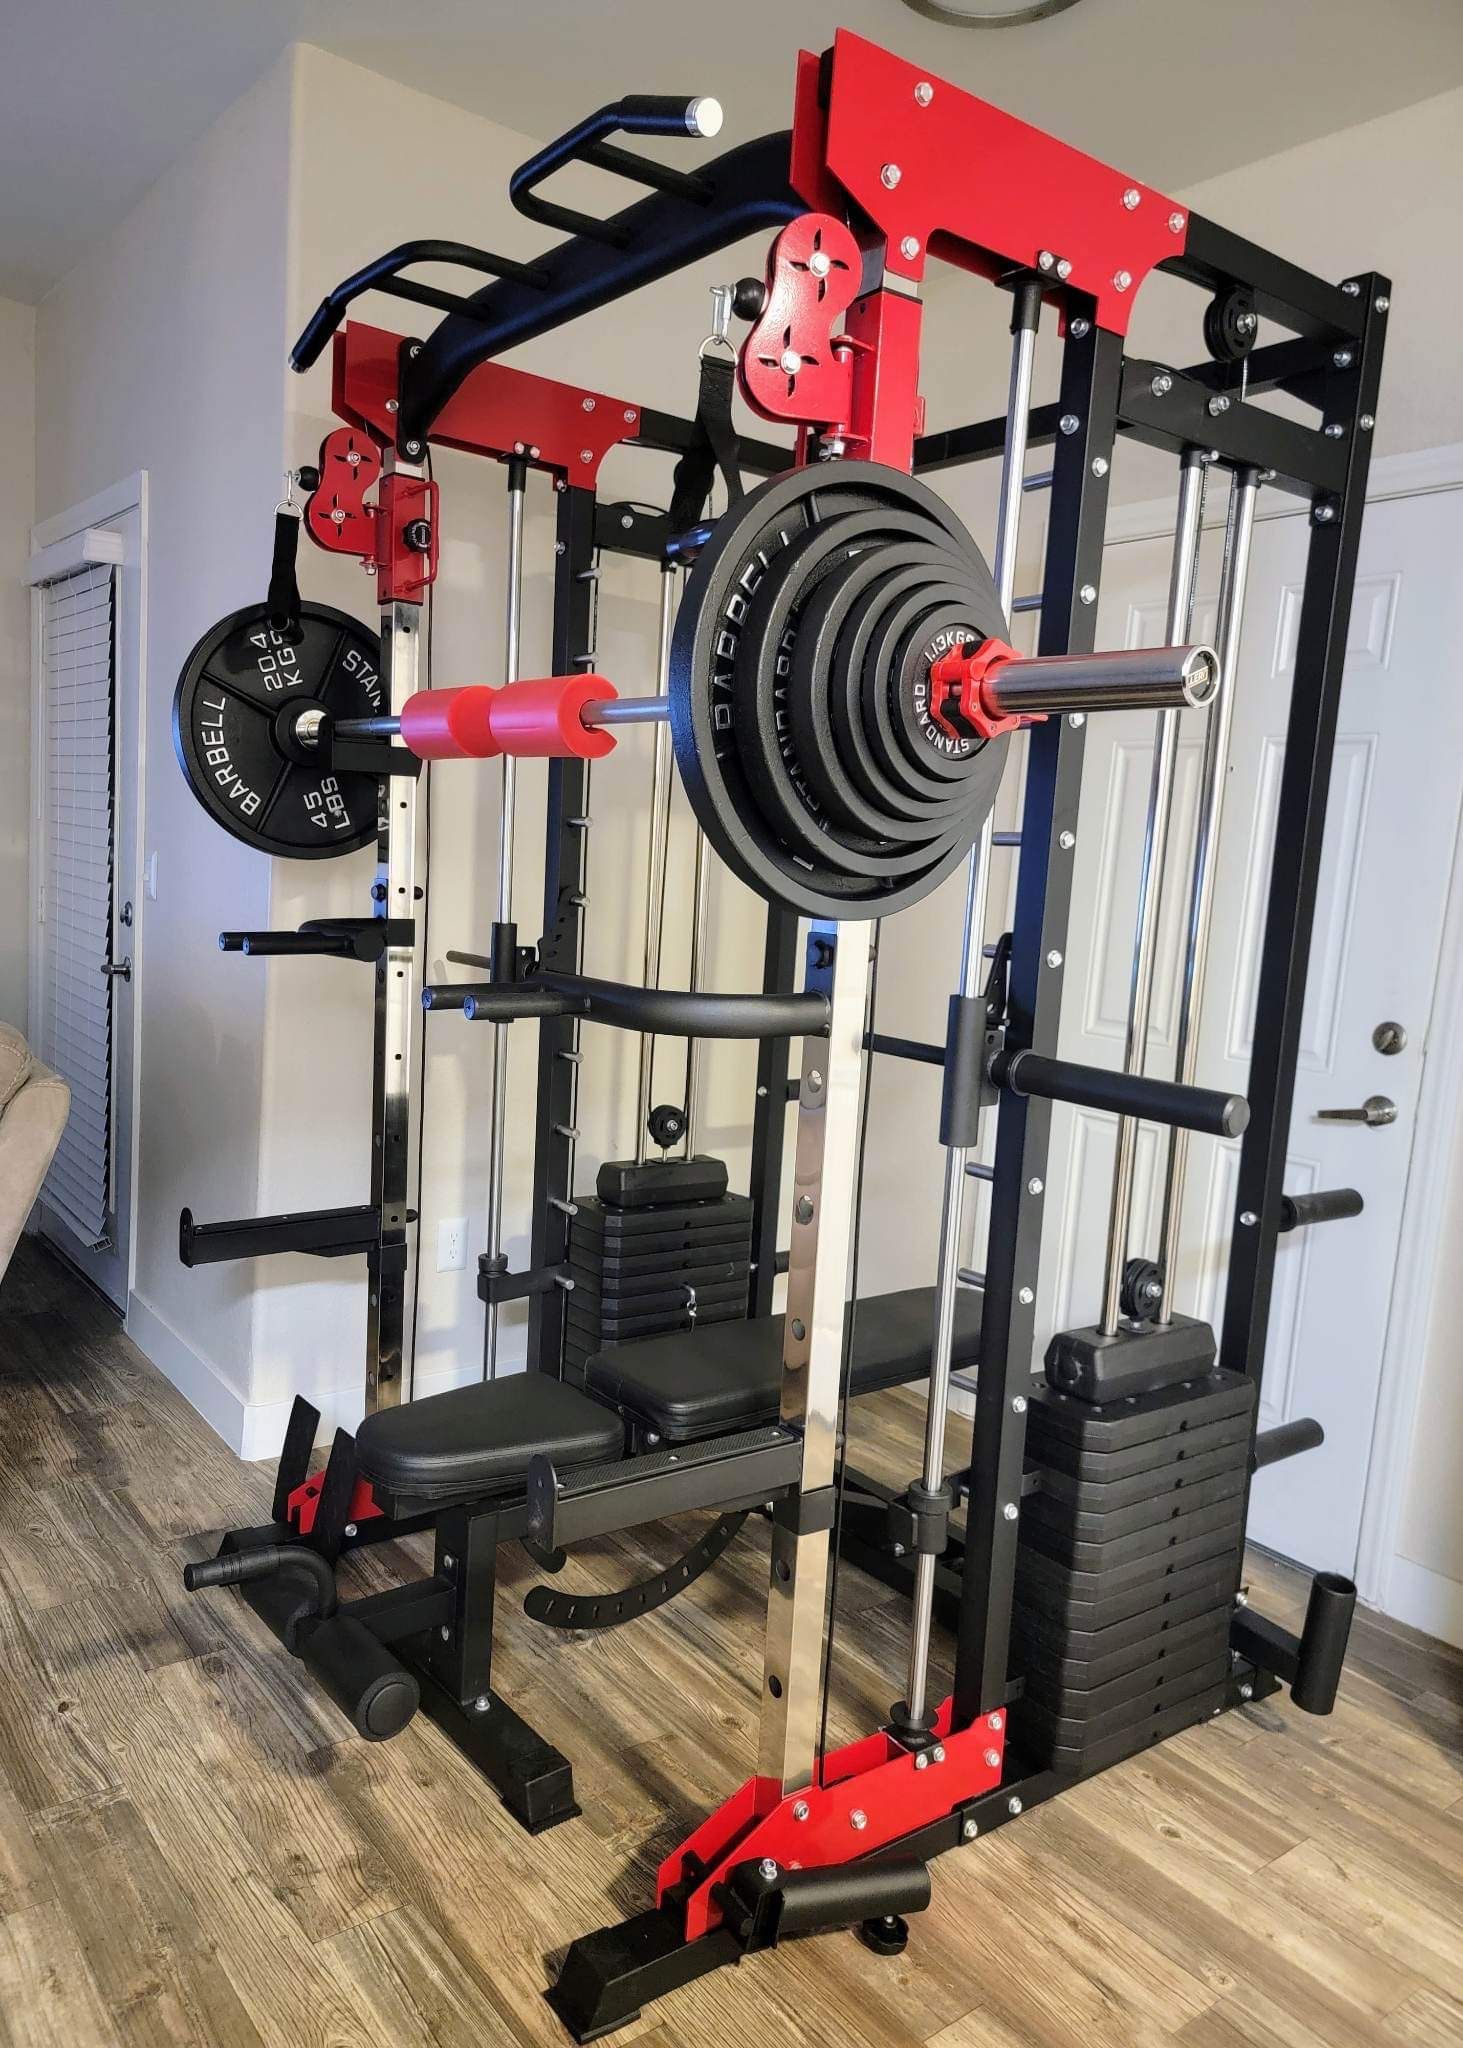 Brand New - Weights INCLUDED. FREE Delivery - LLERO A60 Home Gym. Smith Machine & Functional Trainer